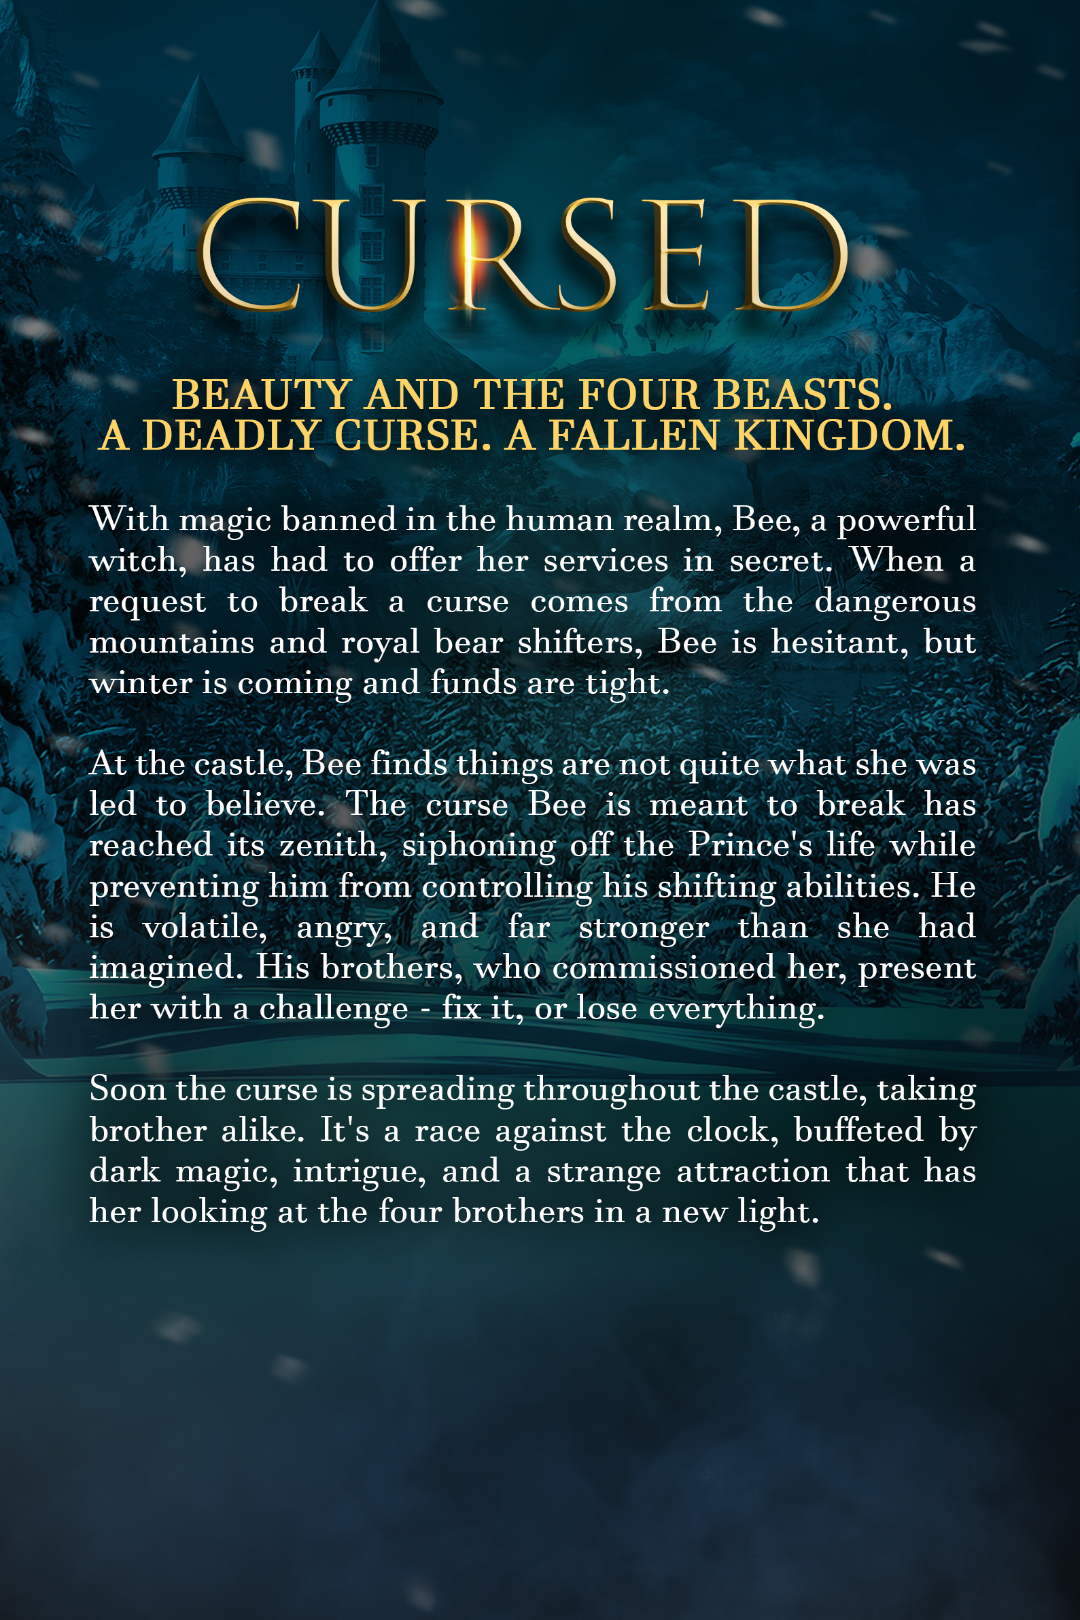 Cursed - Steamy Fairy Tale Retelling - Beauty and the Beast